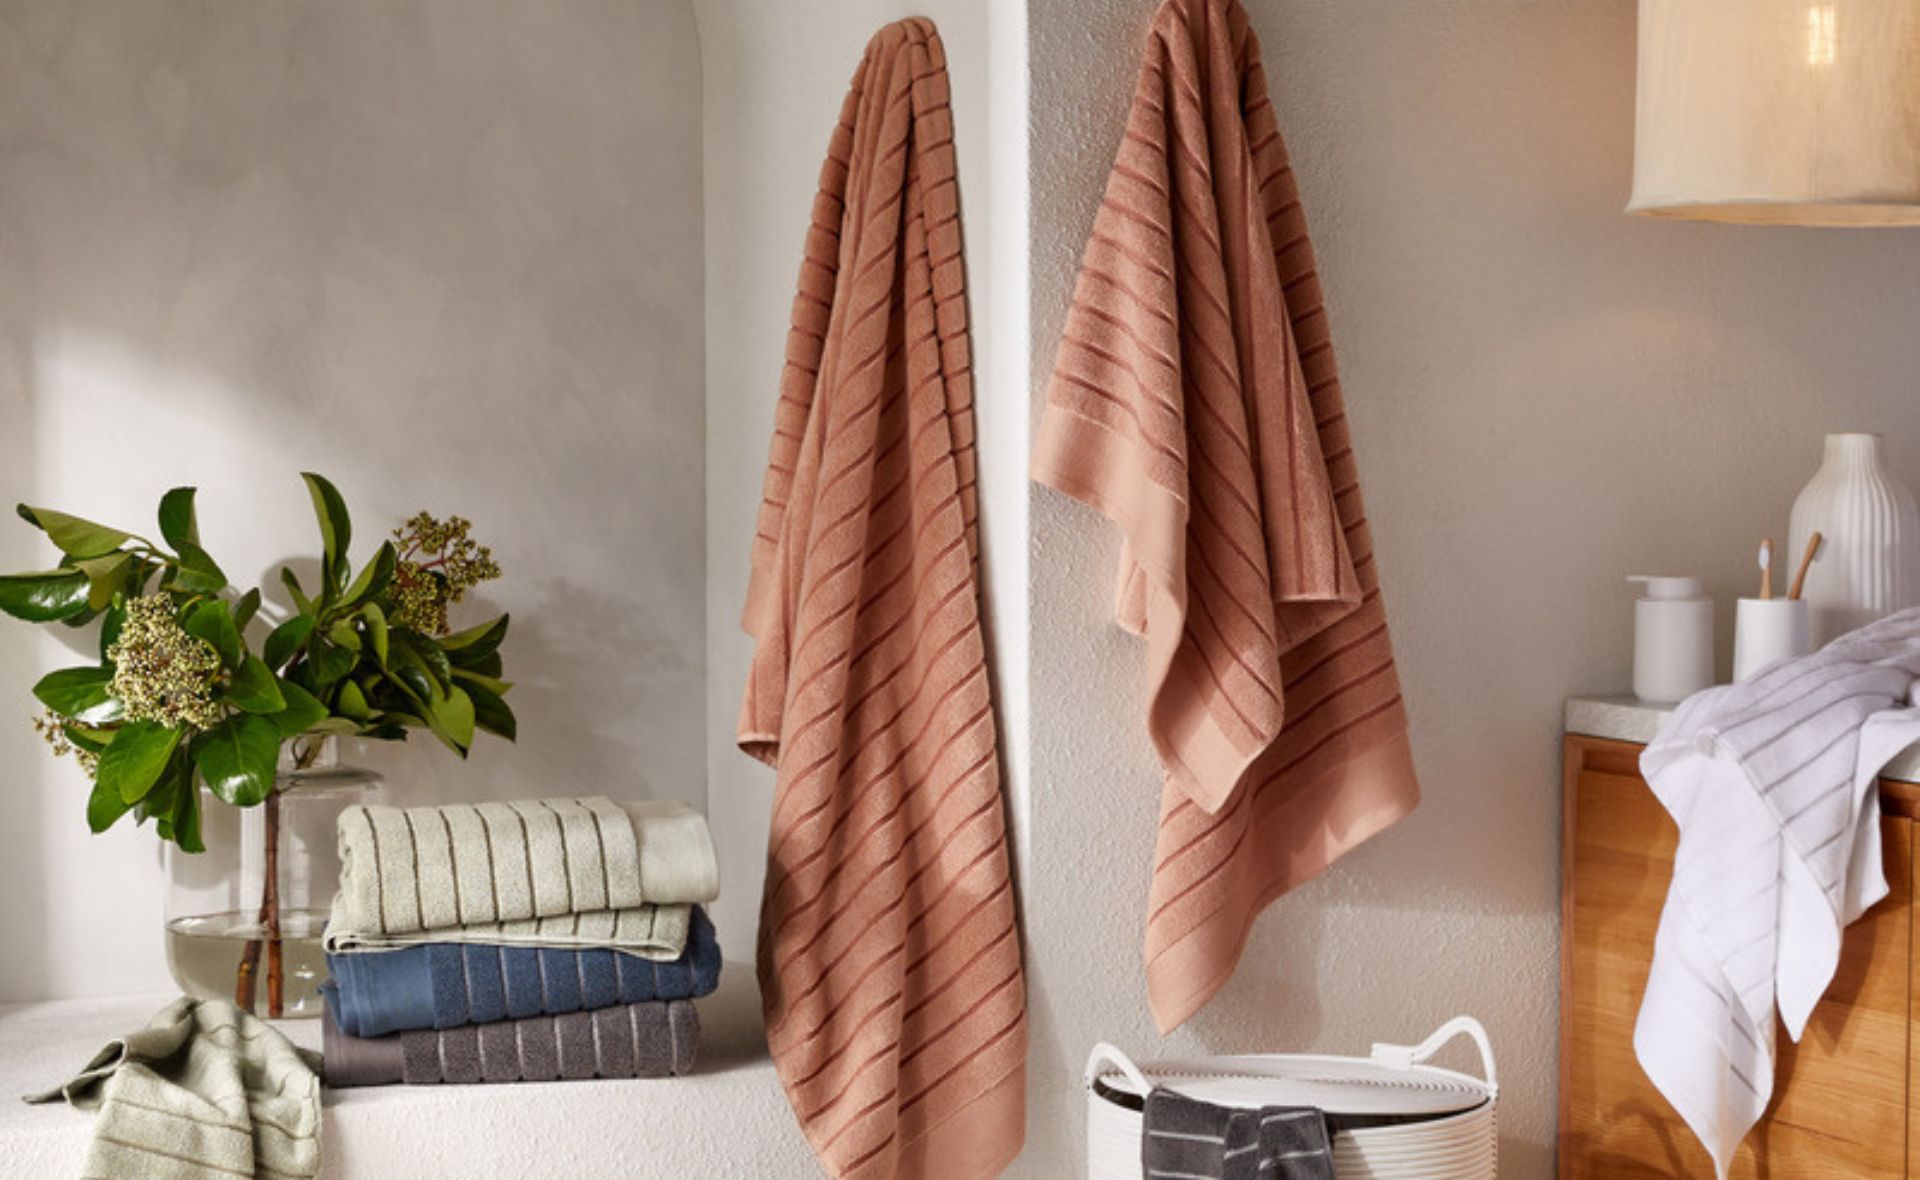 7 plush bath towels to add a touch of luxury to your bath or shower routine